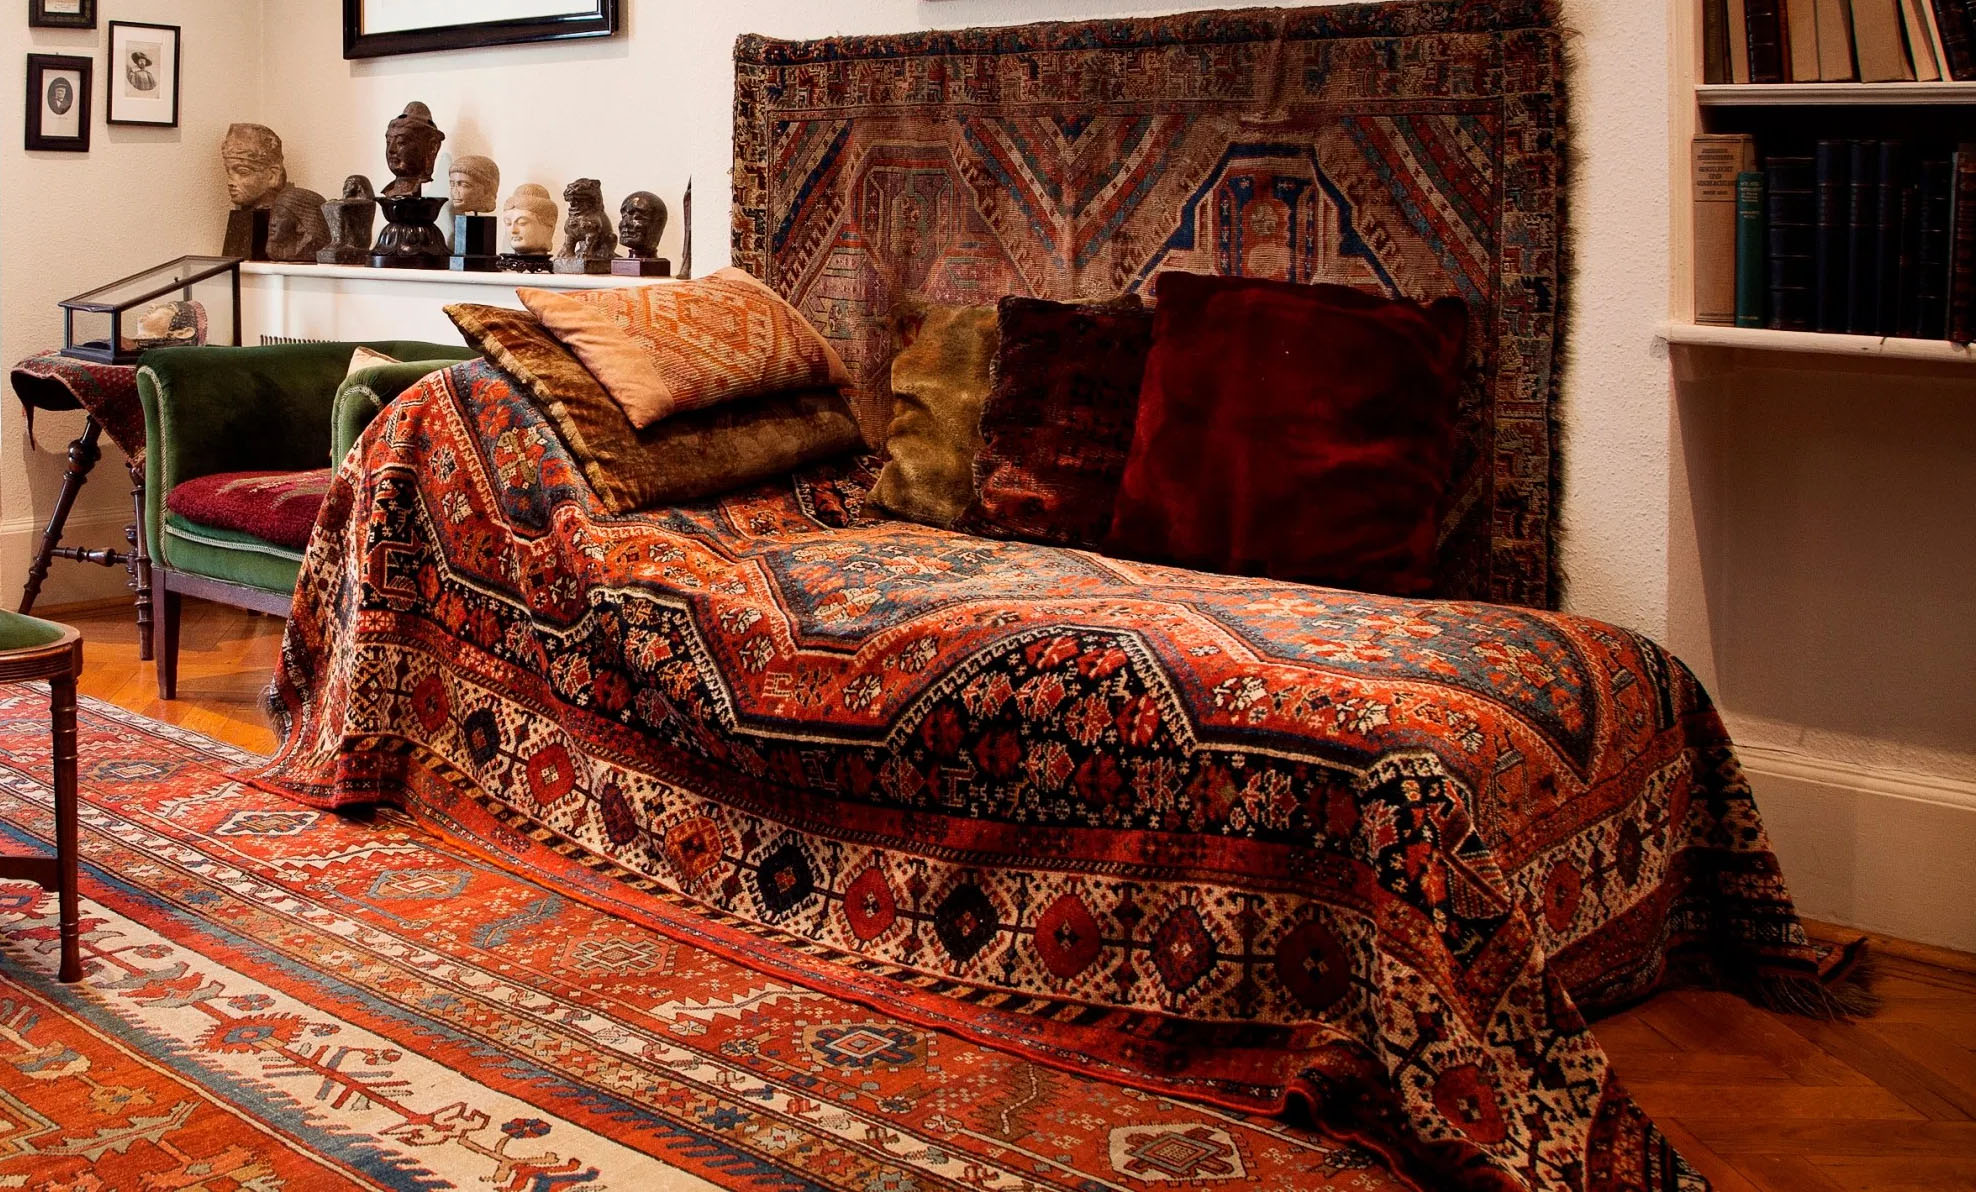 Freud's Famous Psychoanalytic Couch